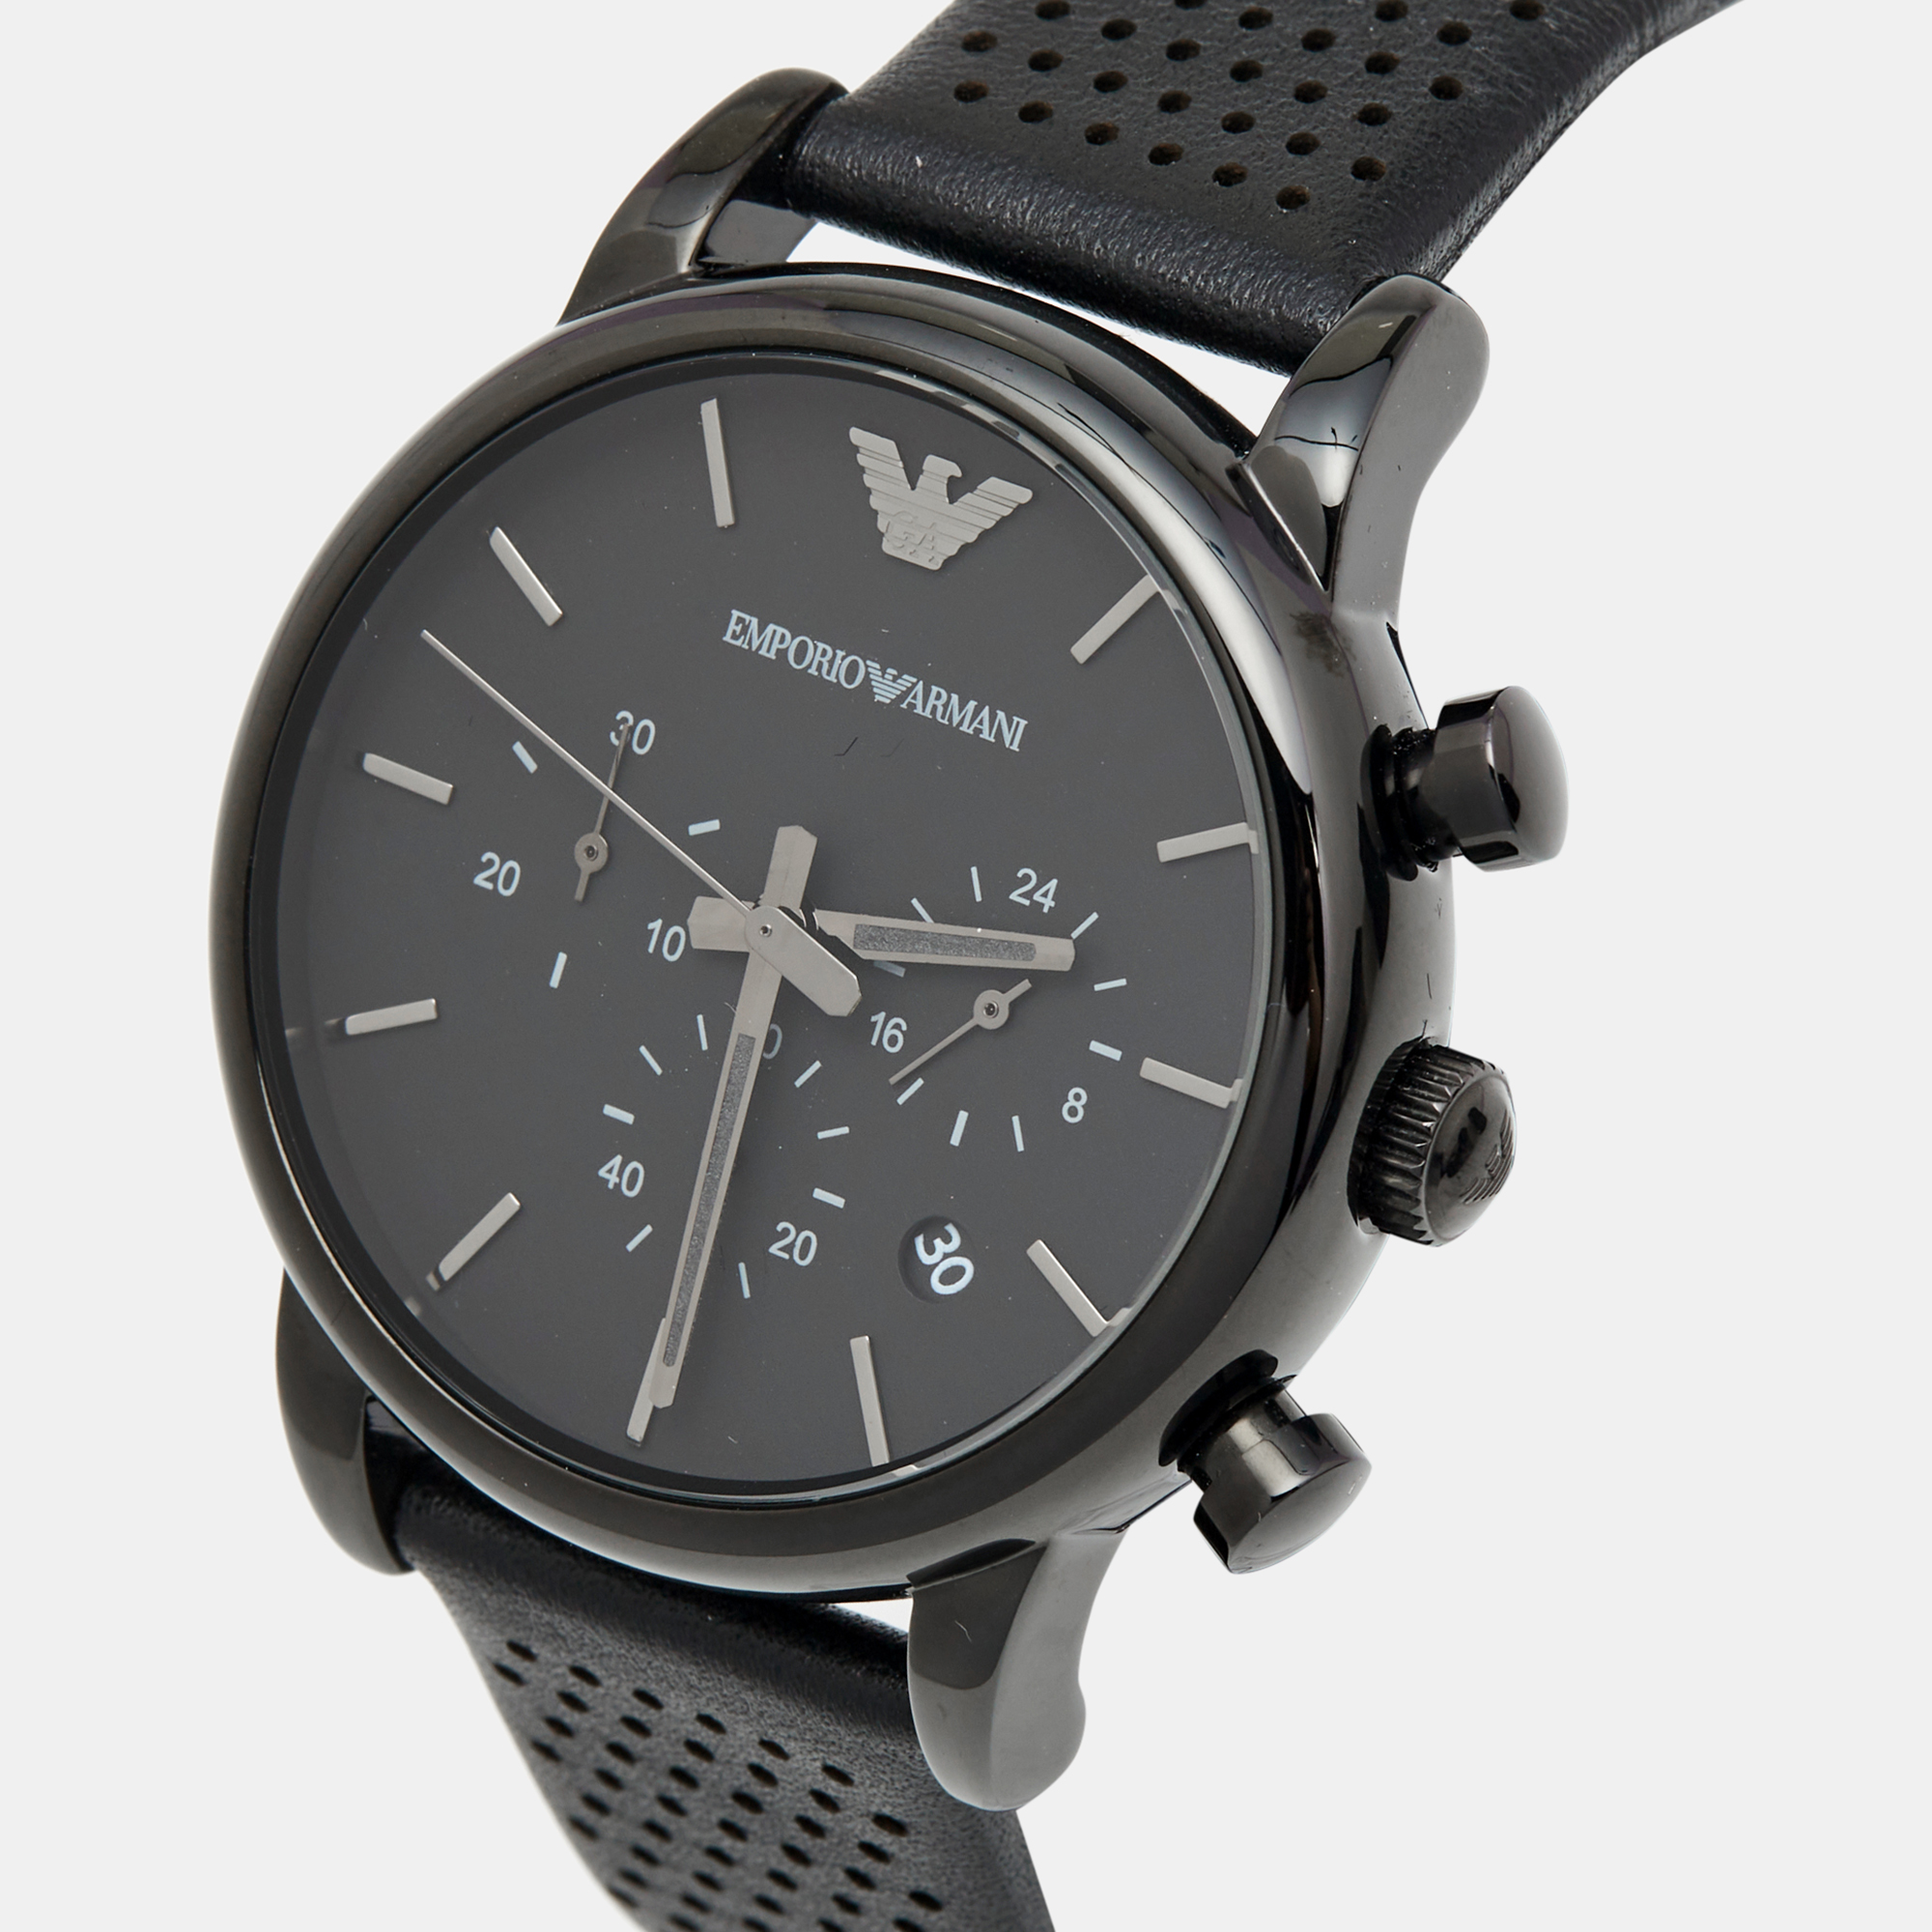 

Emporio Armani Black PVD Coated Stainless Steel Leather Classic AR1737 Men's Wristwatch